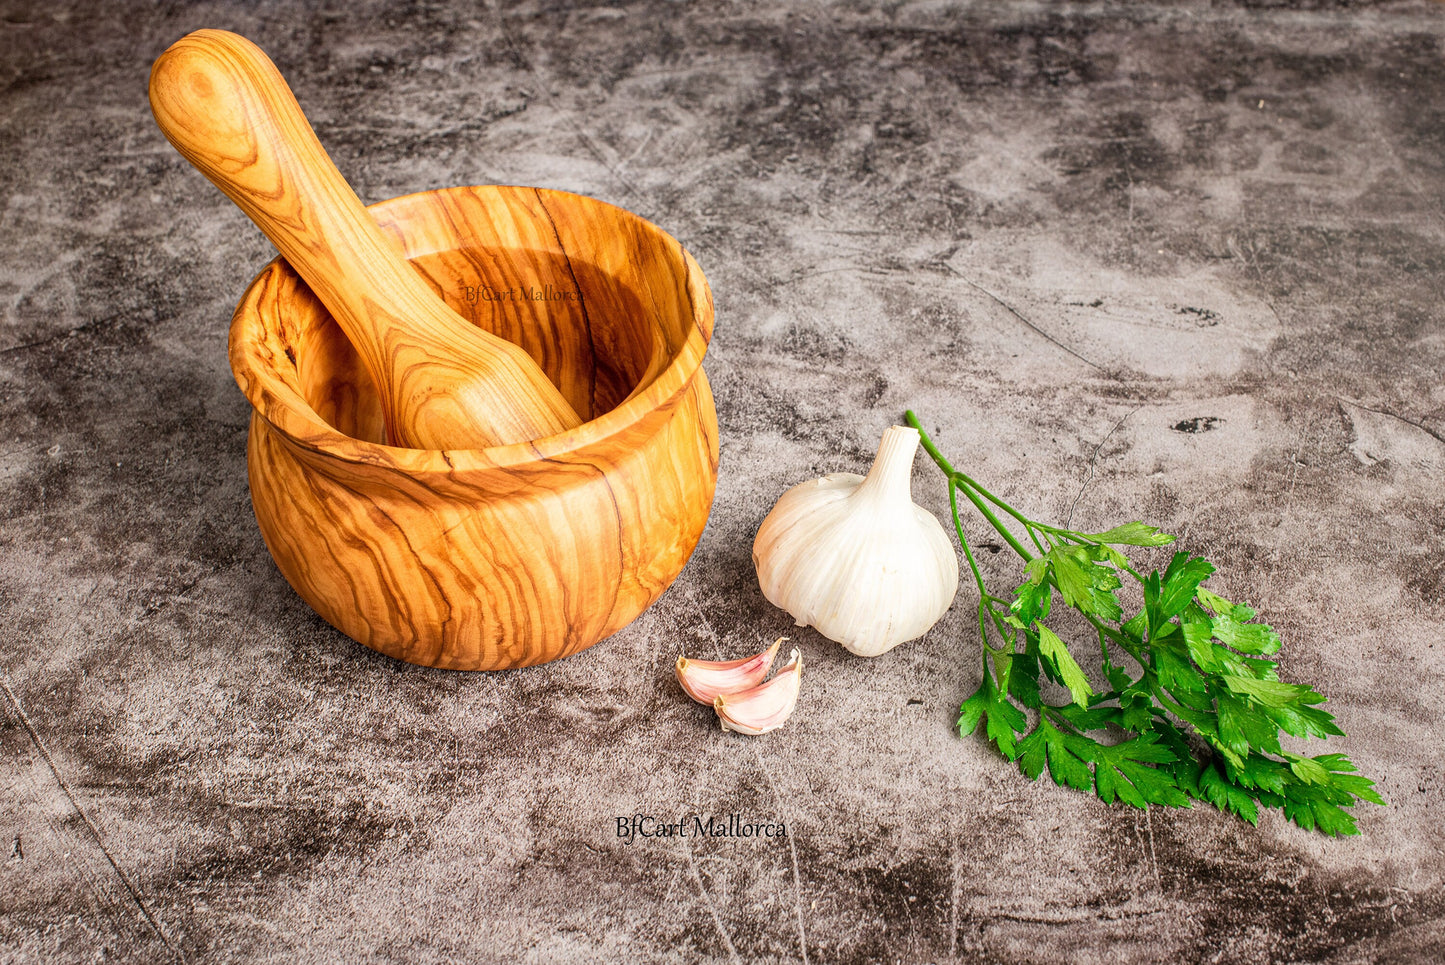 Mortar and Pestle Olive Wood for Cooking, Mortar for Grinding Spices, Vintage Mortar, Wood Mortar and Pestle Set, wood mortar pestle,